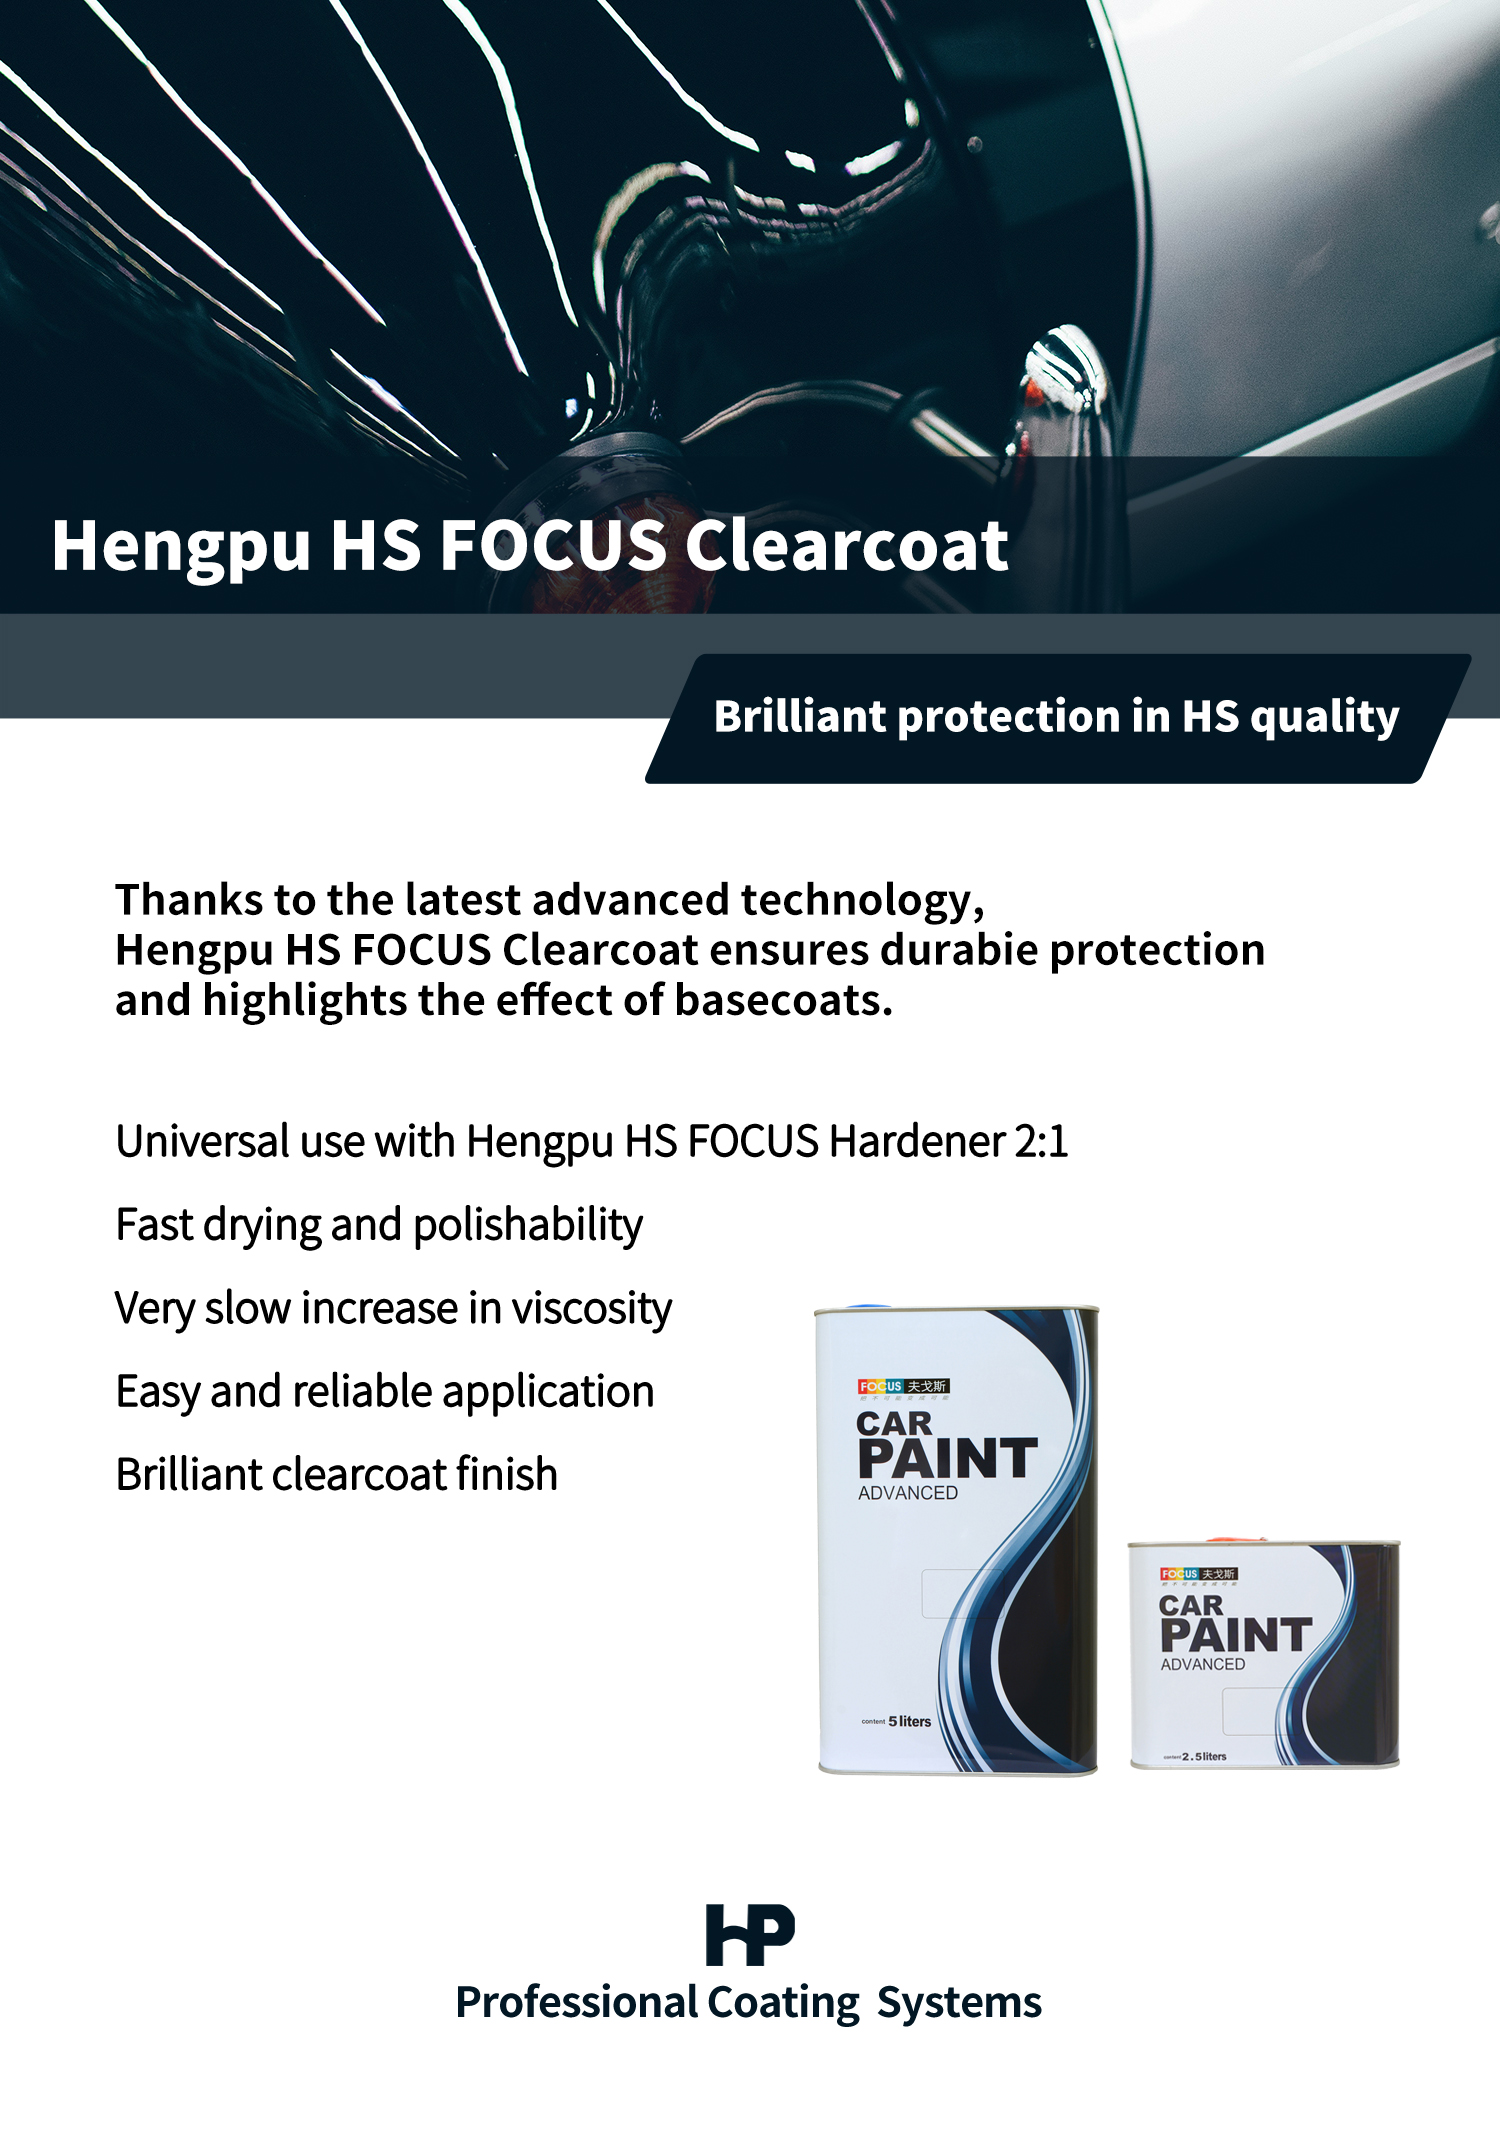 High Application High Gloss Auto Paint Easy Operation High Plumpness Car Paint MESTEO HS Highlighting Clearcoat